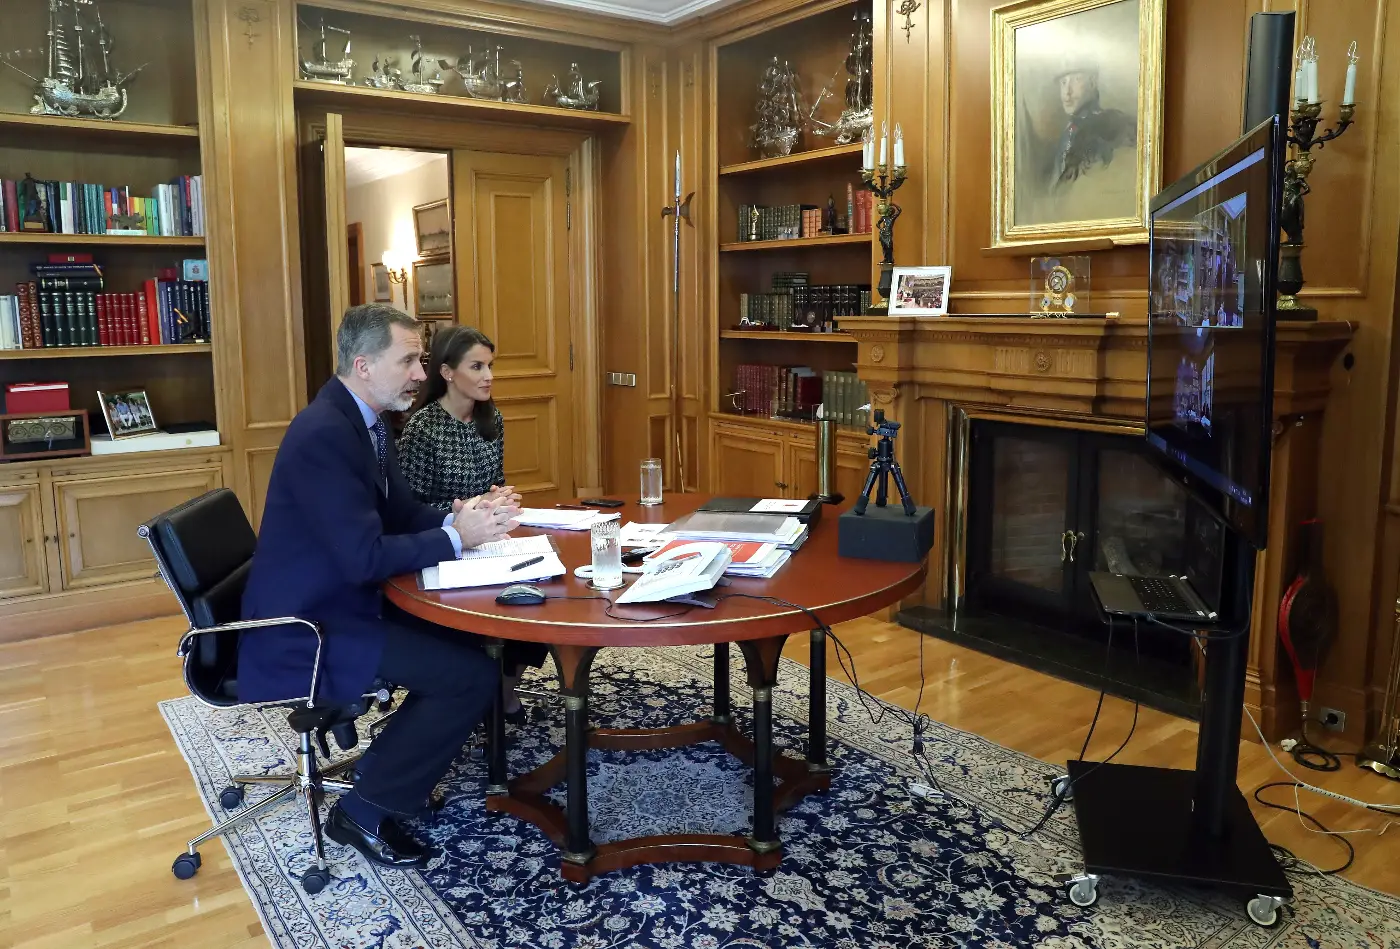 Felipe and Letizia in a Videoconference with representatives of the Carrefour Group